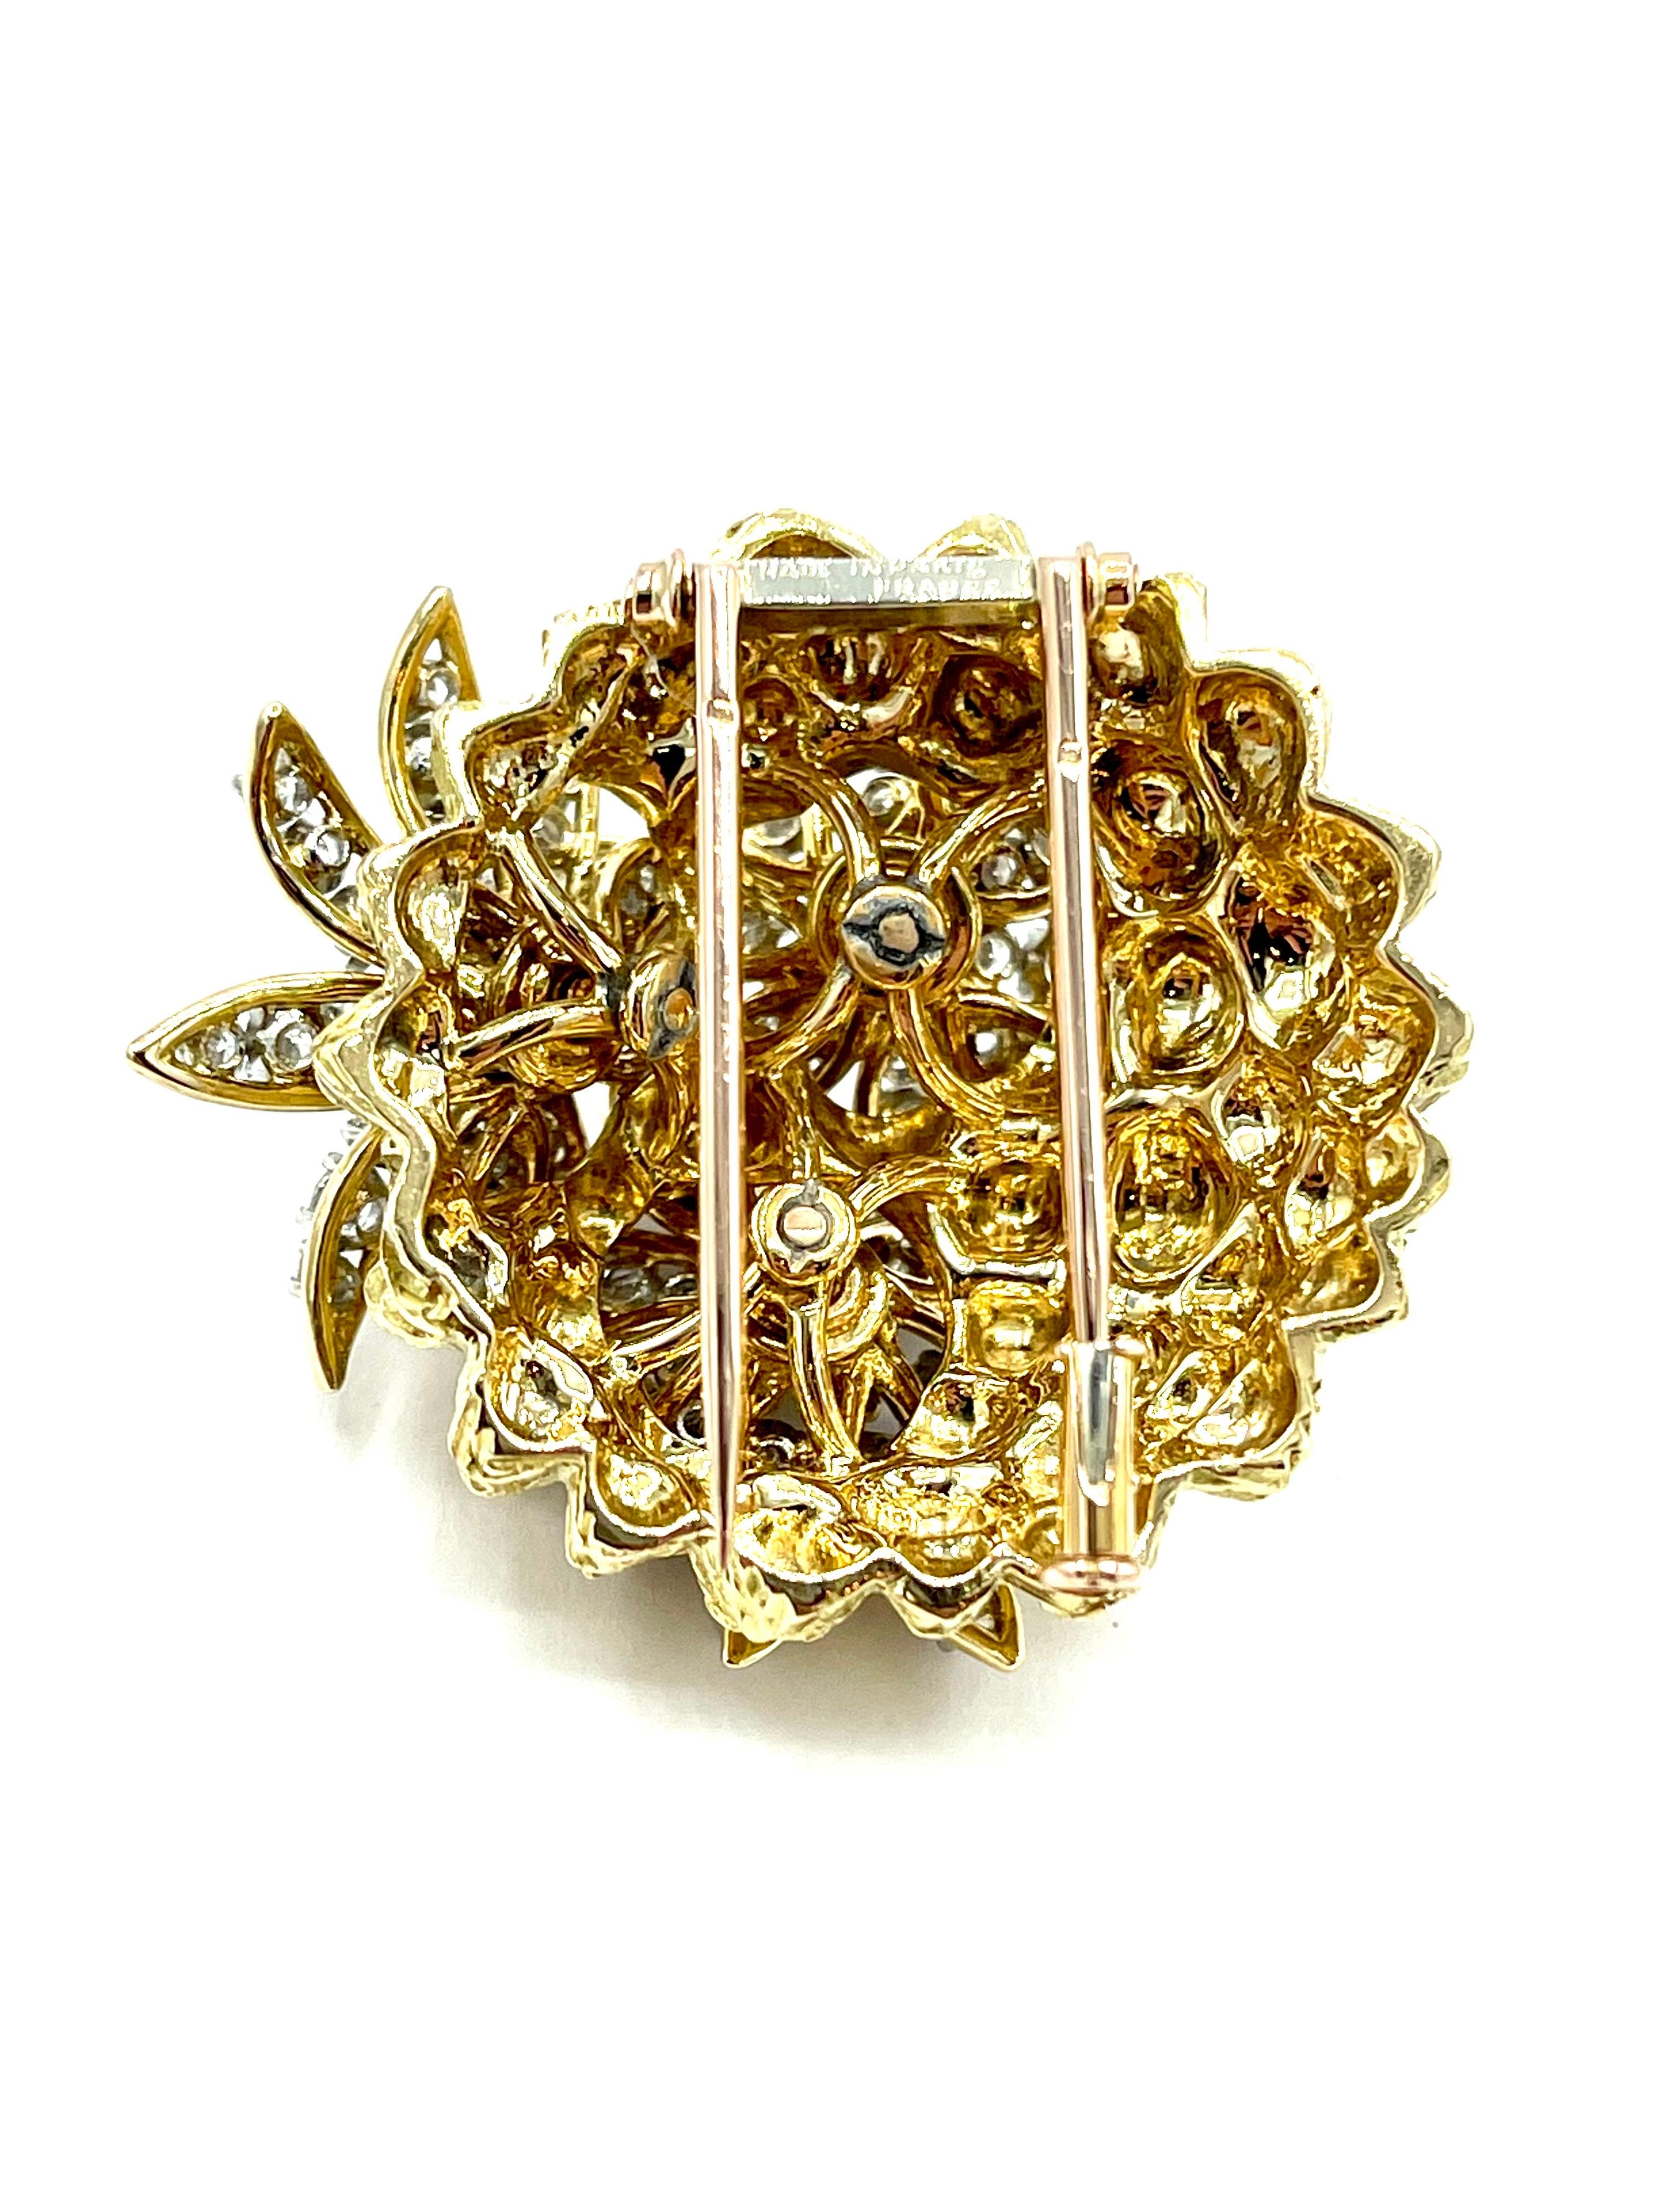 French 3.60 Carat Round Brilliant Diamond Domed 18k Floral Brooch In Excellent Condition For Sale In Chevy Chase, MD